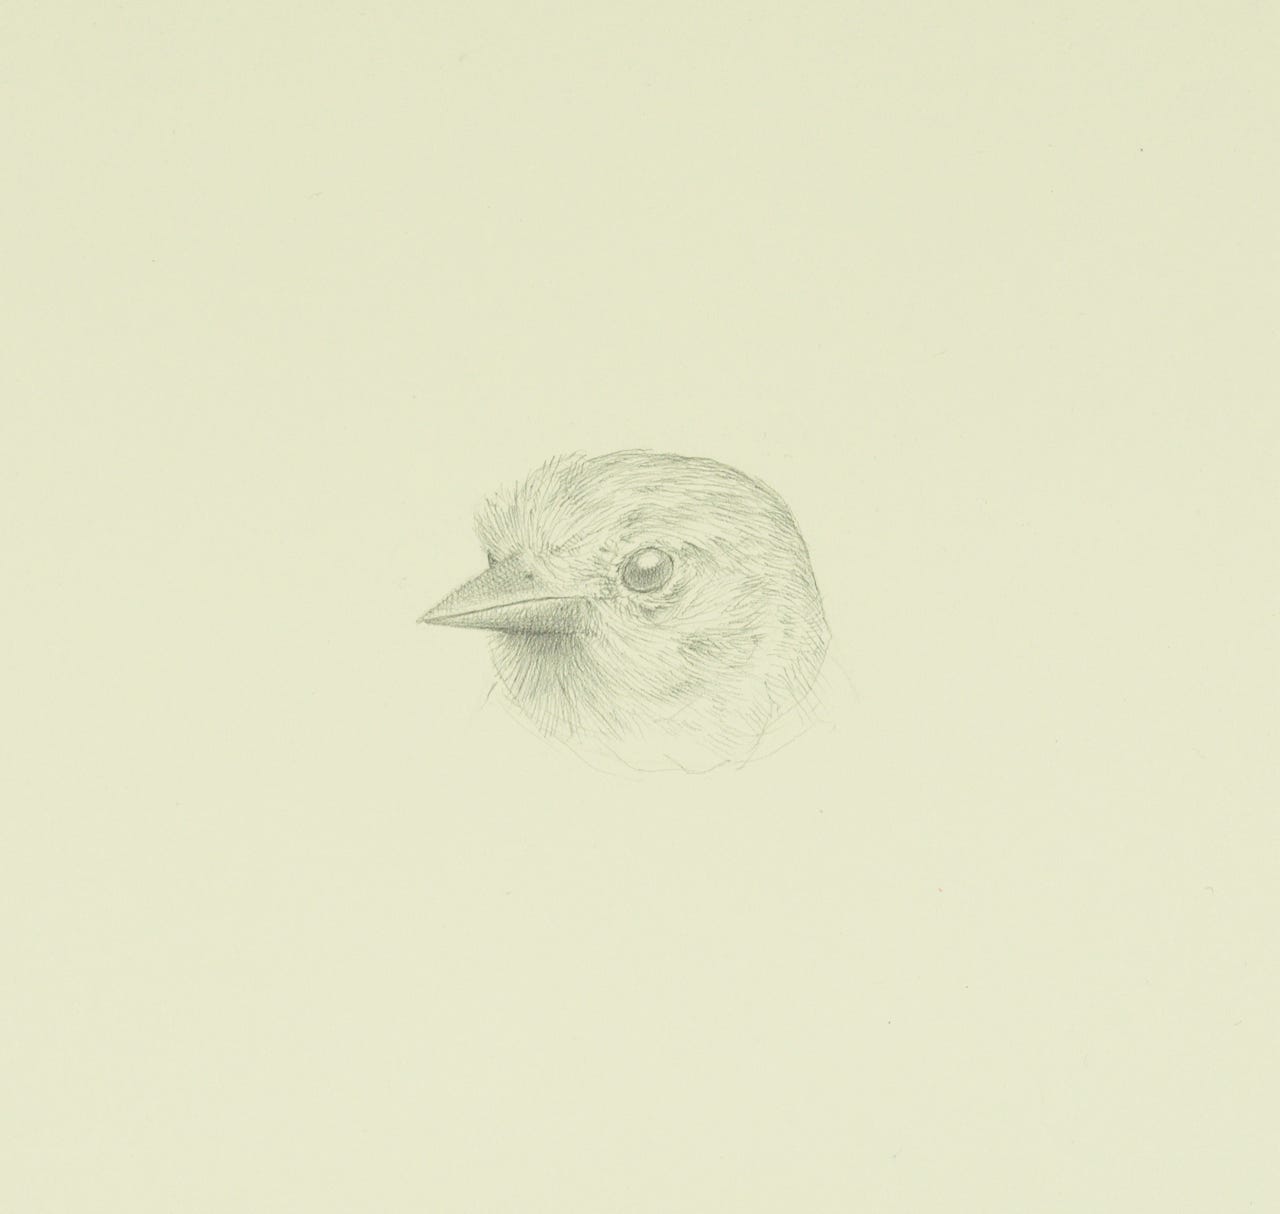 Western Oriole, 2021, silverpoint on prepared paper, 7 x 7 1/2 inches